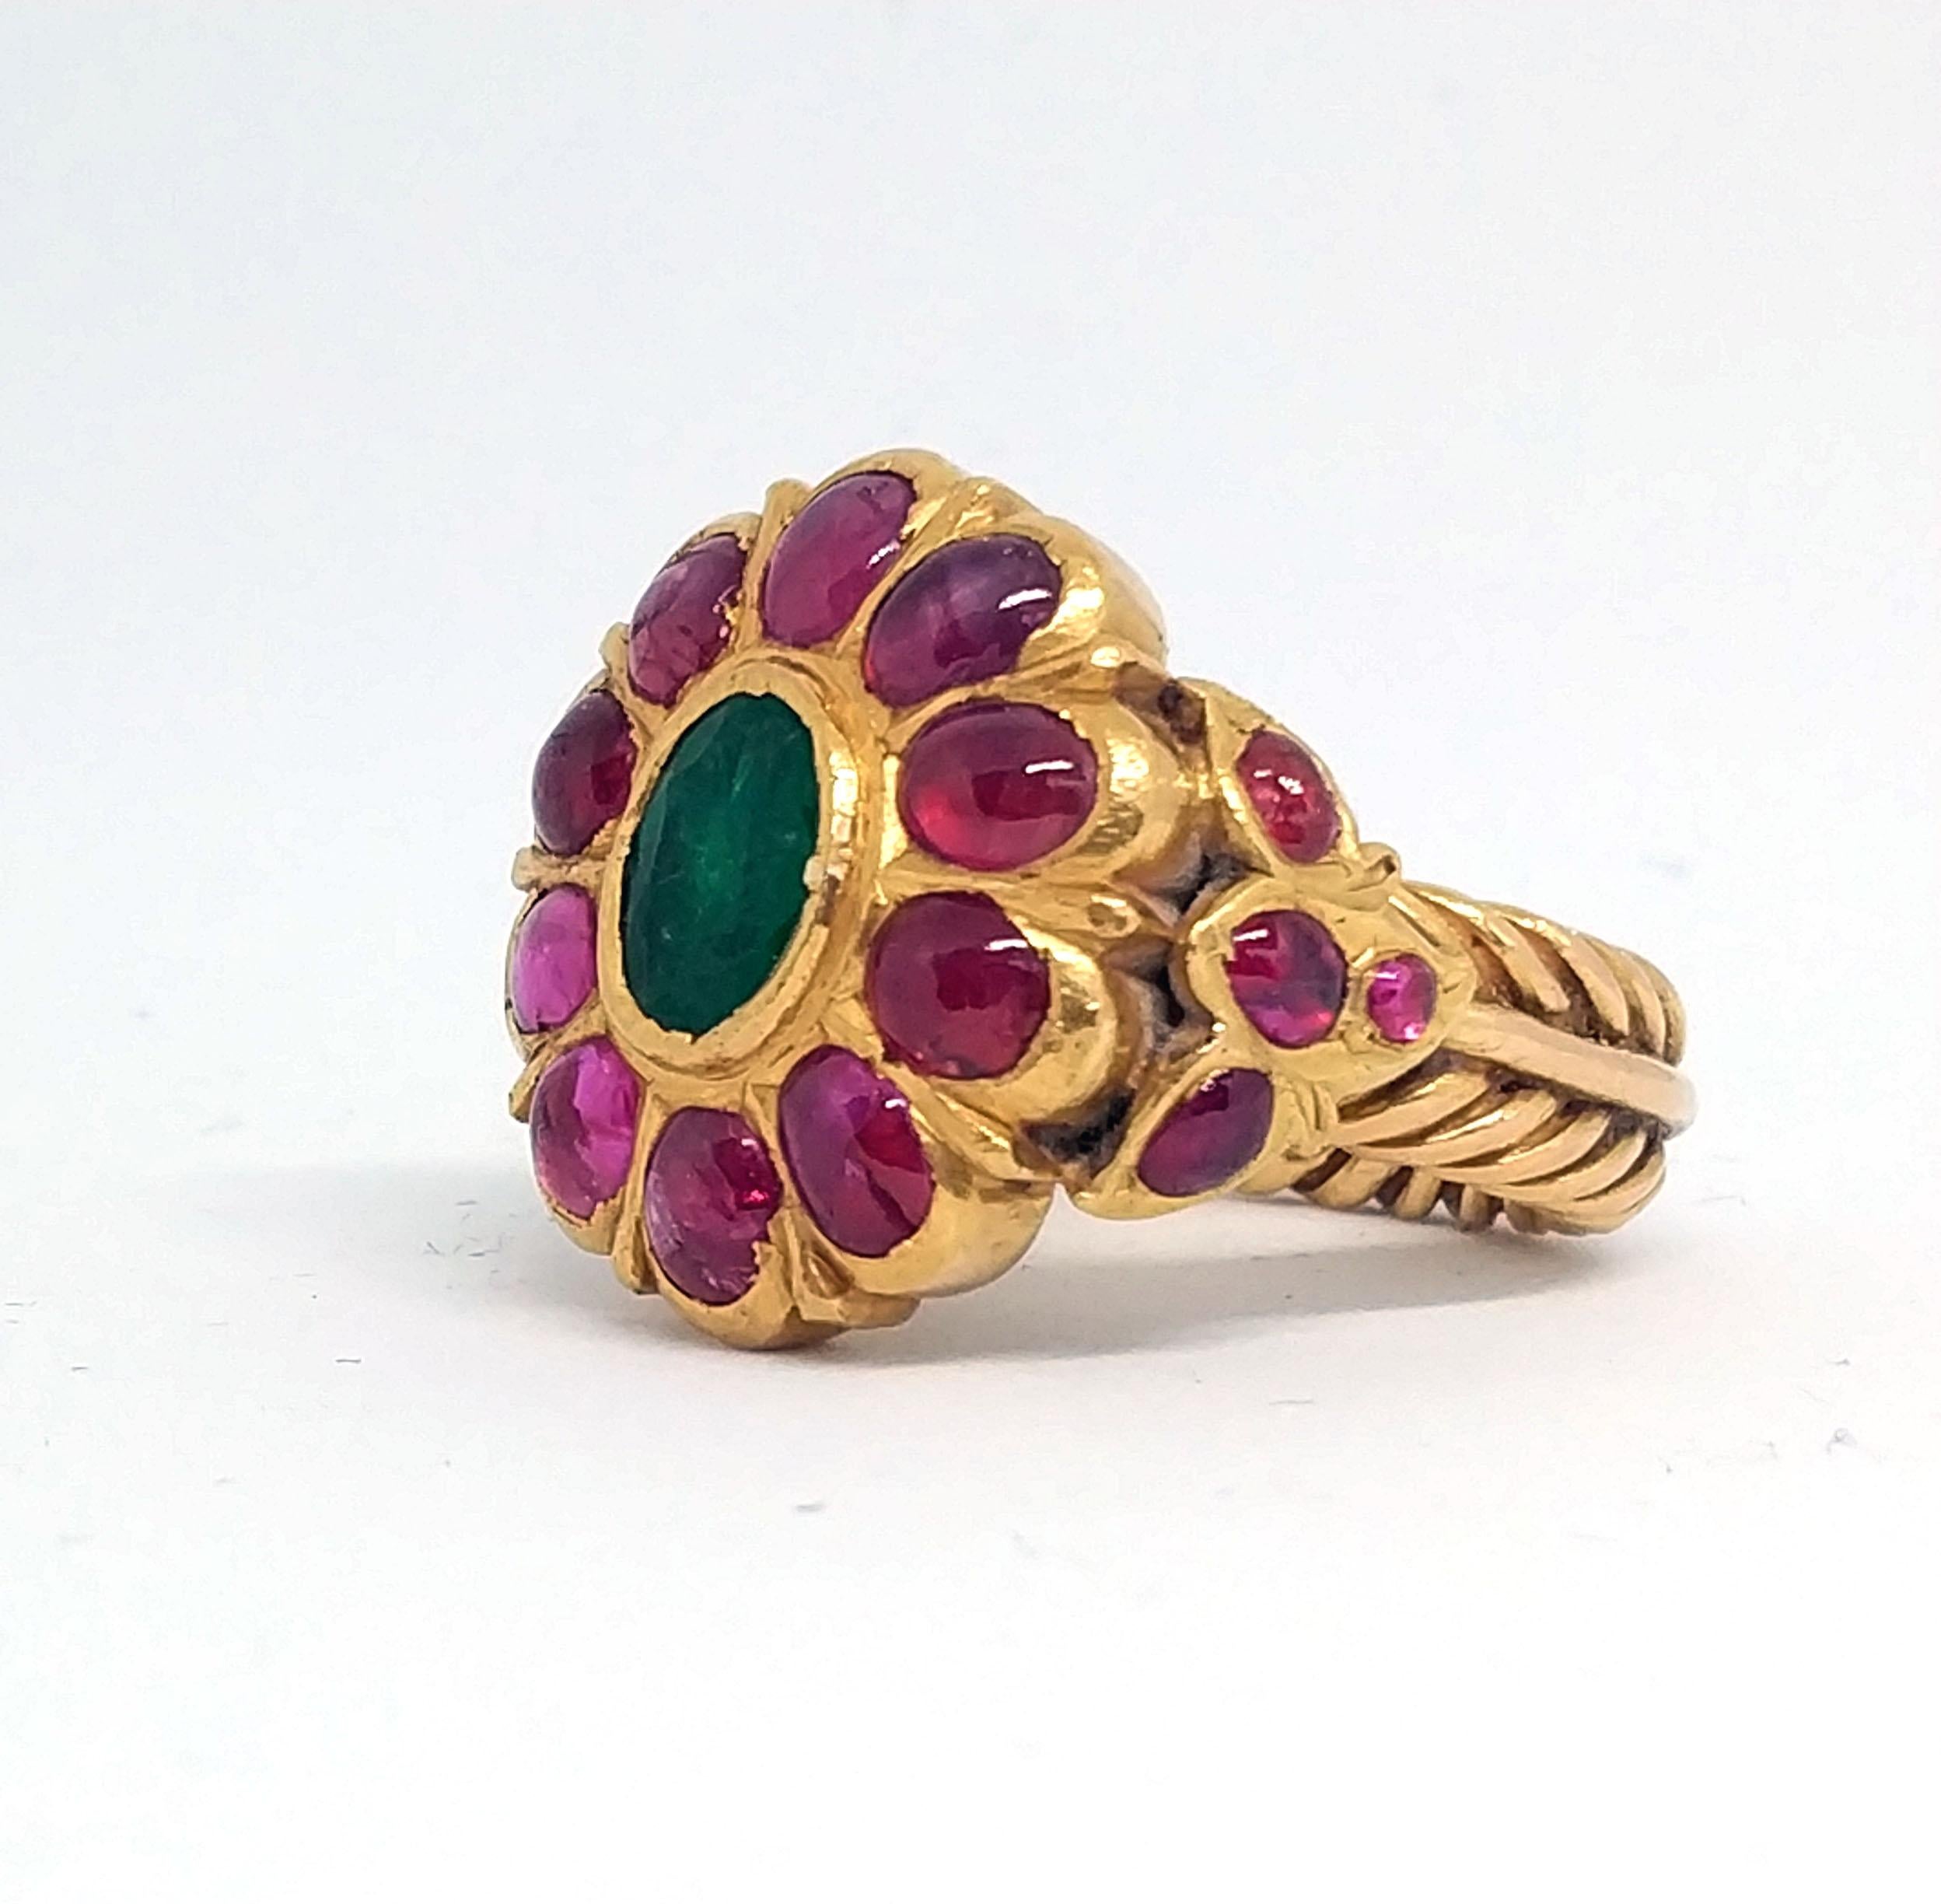 Antique Royal 5.5 carat Ruby and 3 carat Emerald Ring in 23 Carat Gold For Sale 9